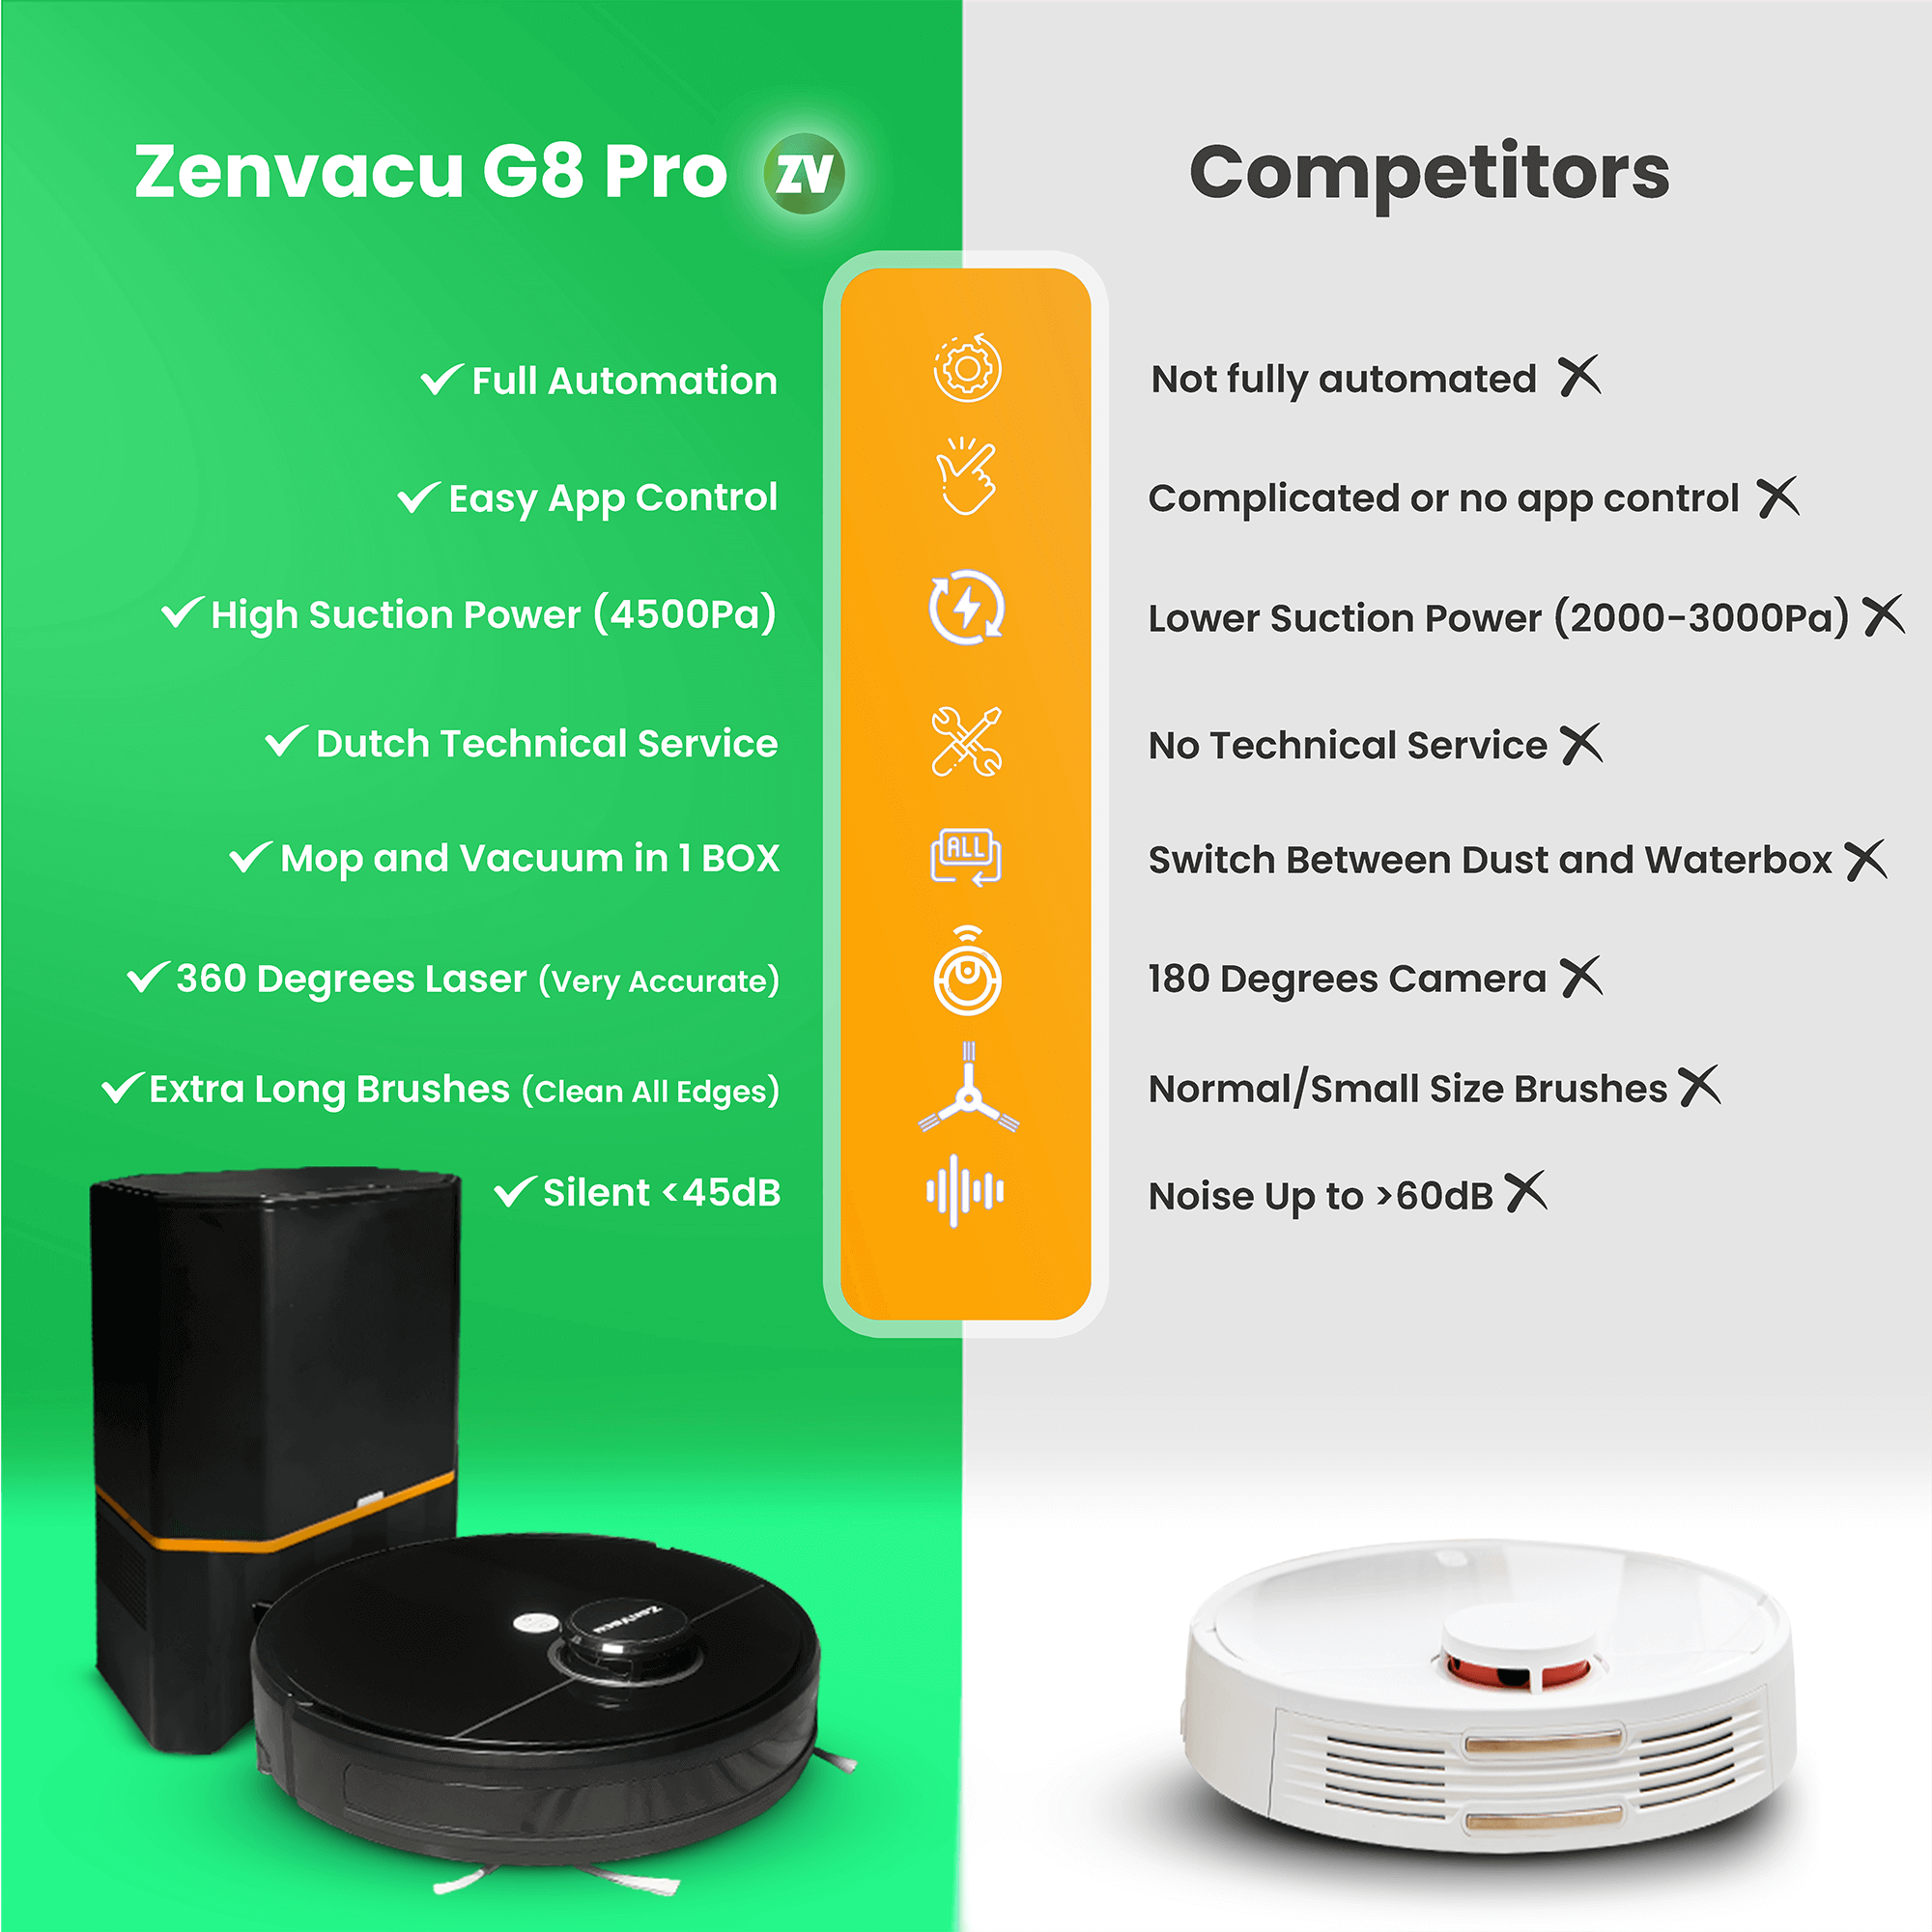 ZenVacu G8 Pro vs. Competition: Fully automated, easy app control, superior support, high suction power, self-emptying, extra quiet, long sweepers, mopping and vacuuming. The ultimate cleaning solution.